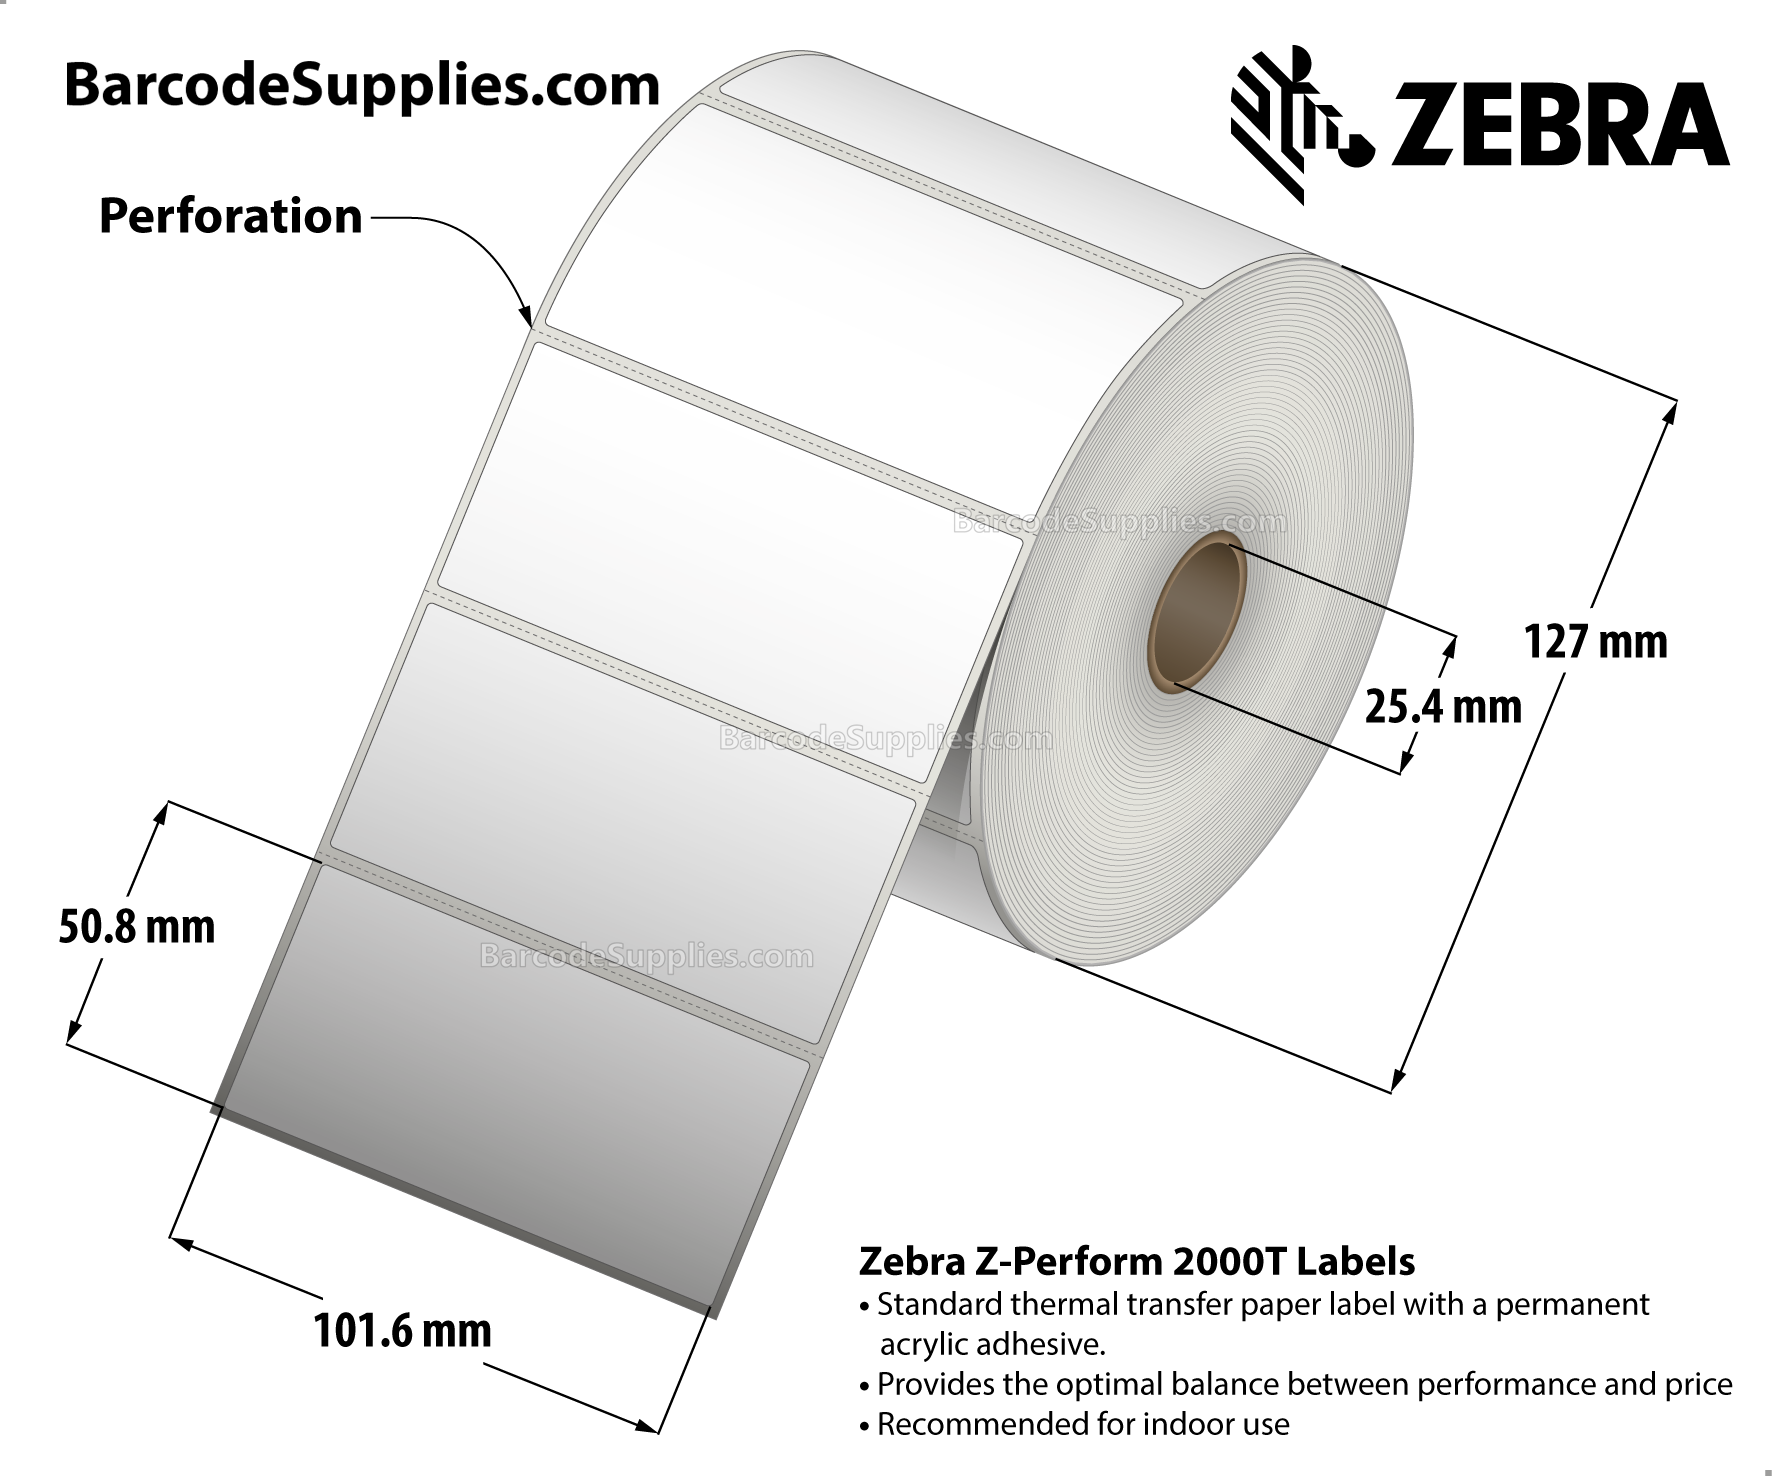 4 x 2 Thermal Transfer White Z-Perform 2000T Labels With Permanent Adhesive - Perforated - 1320 Labels Per Roll - Carton Of 6 Rolls - 7920 Labels Total - MPN: 10005851